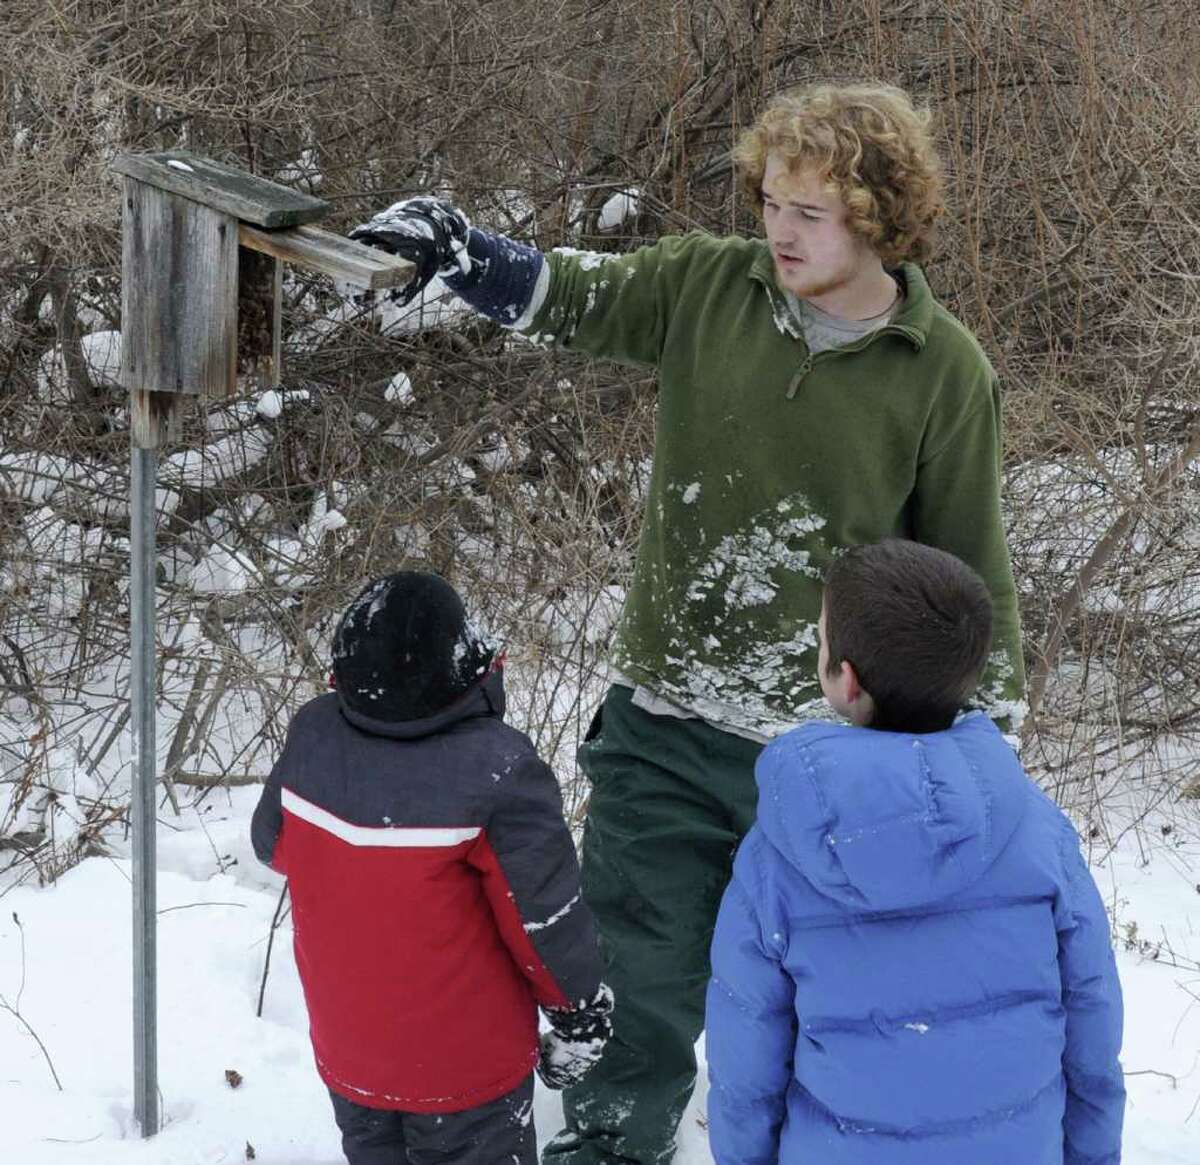 Camp counselor Calder Gladstone, 19, shows Nathan Tietjen, 5, left, and Emmit Adjmi, 8, the inside of a bluebird house during the Pratt Nature Center winter camp in New Milford on Tuesday, Dec. 28, 2010.